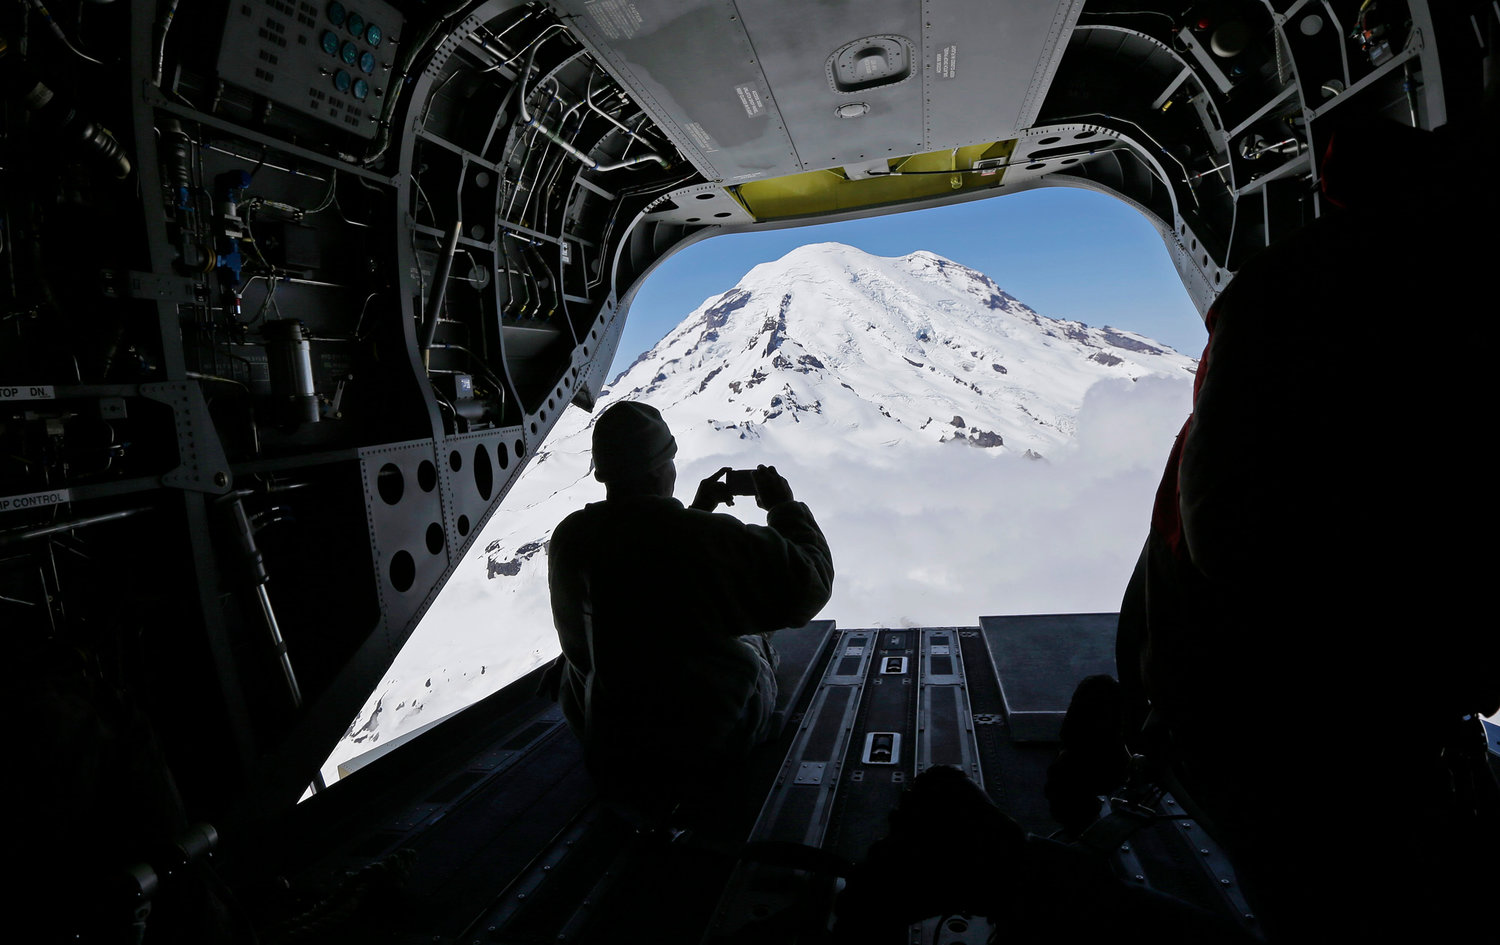 In this photo taken May 15, 2015, U.S. Army Reserve Sgt. Charlesell Thrower takes a photo of Mount Rainier out the open rear door of a Boeing CH-47F Chinook helicopter as it flies in Washington state to give members of the media a view of mountain search and rescue training exercises involving another CH-47F.